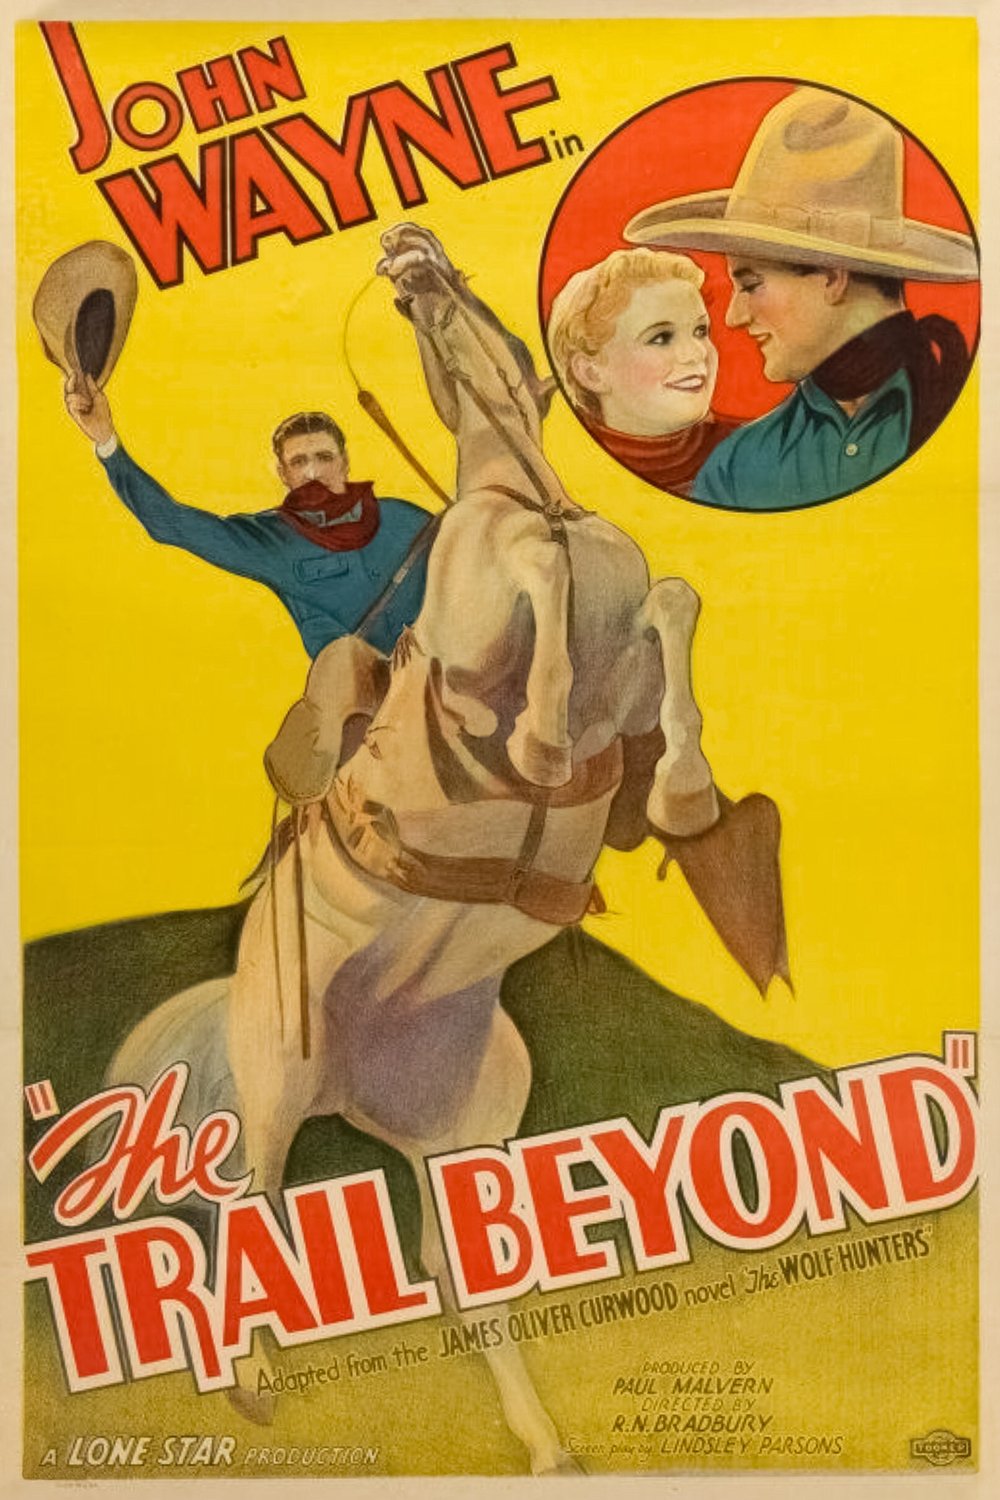 Poster of the movie The Trail Beyond